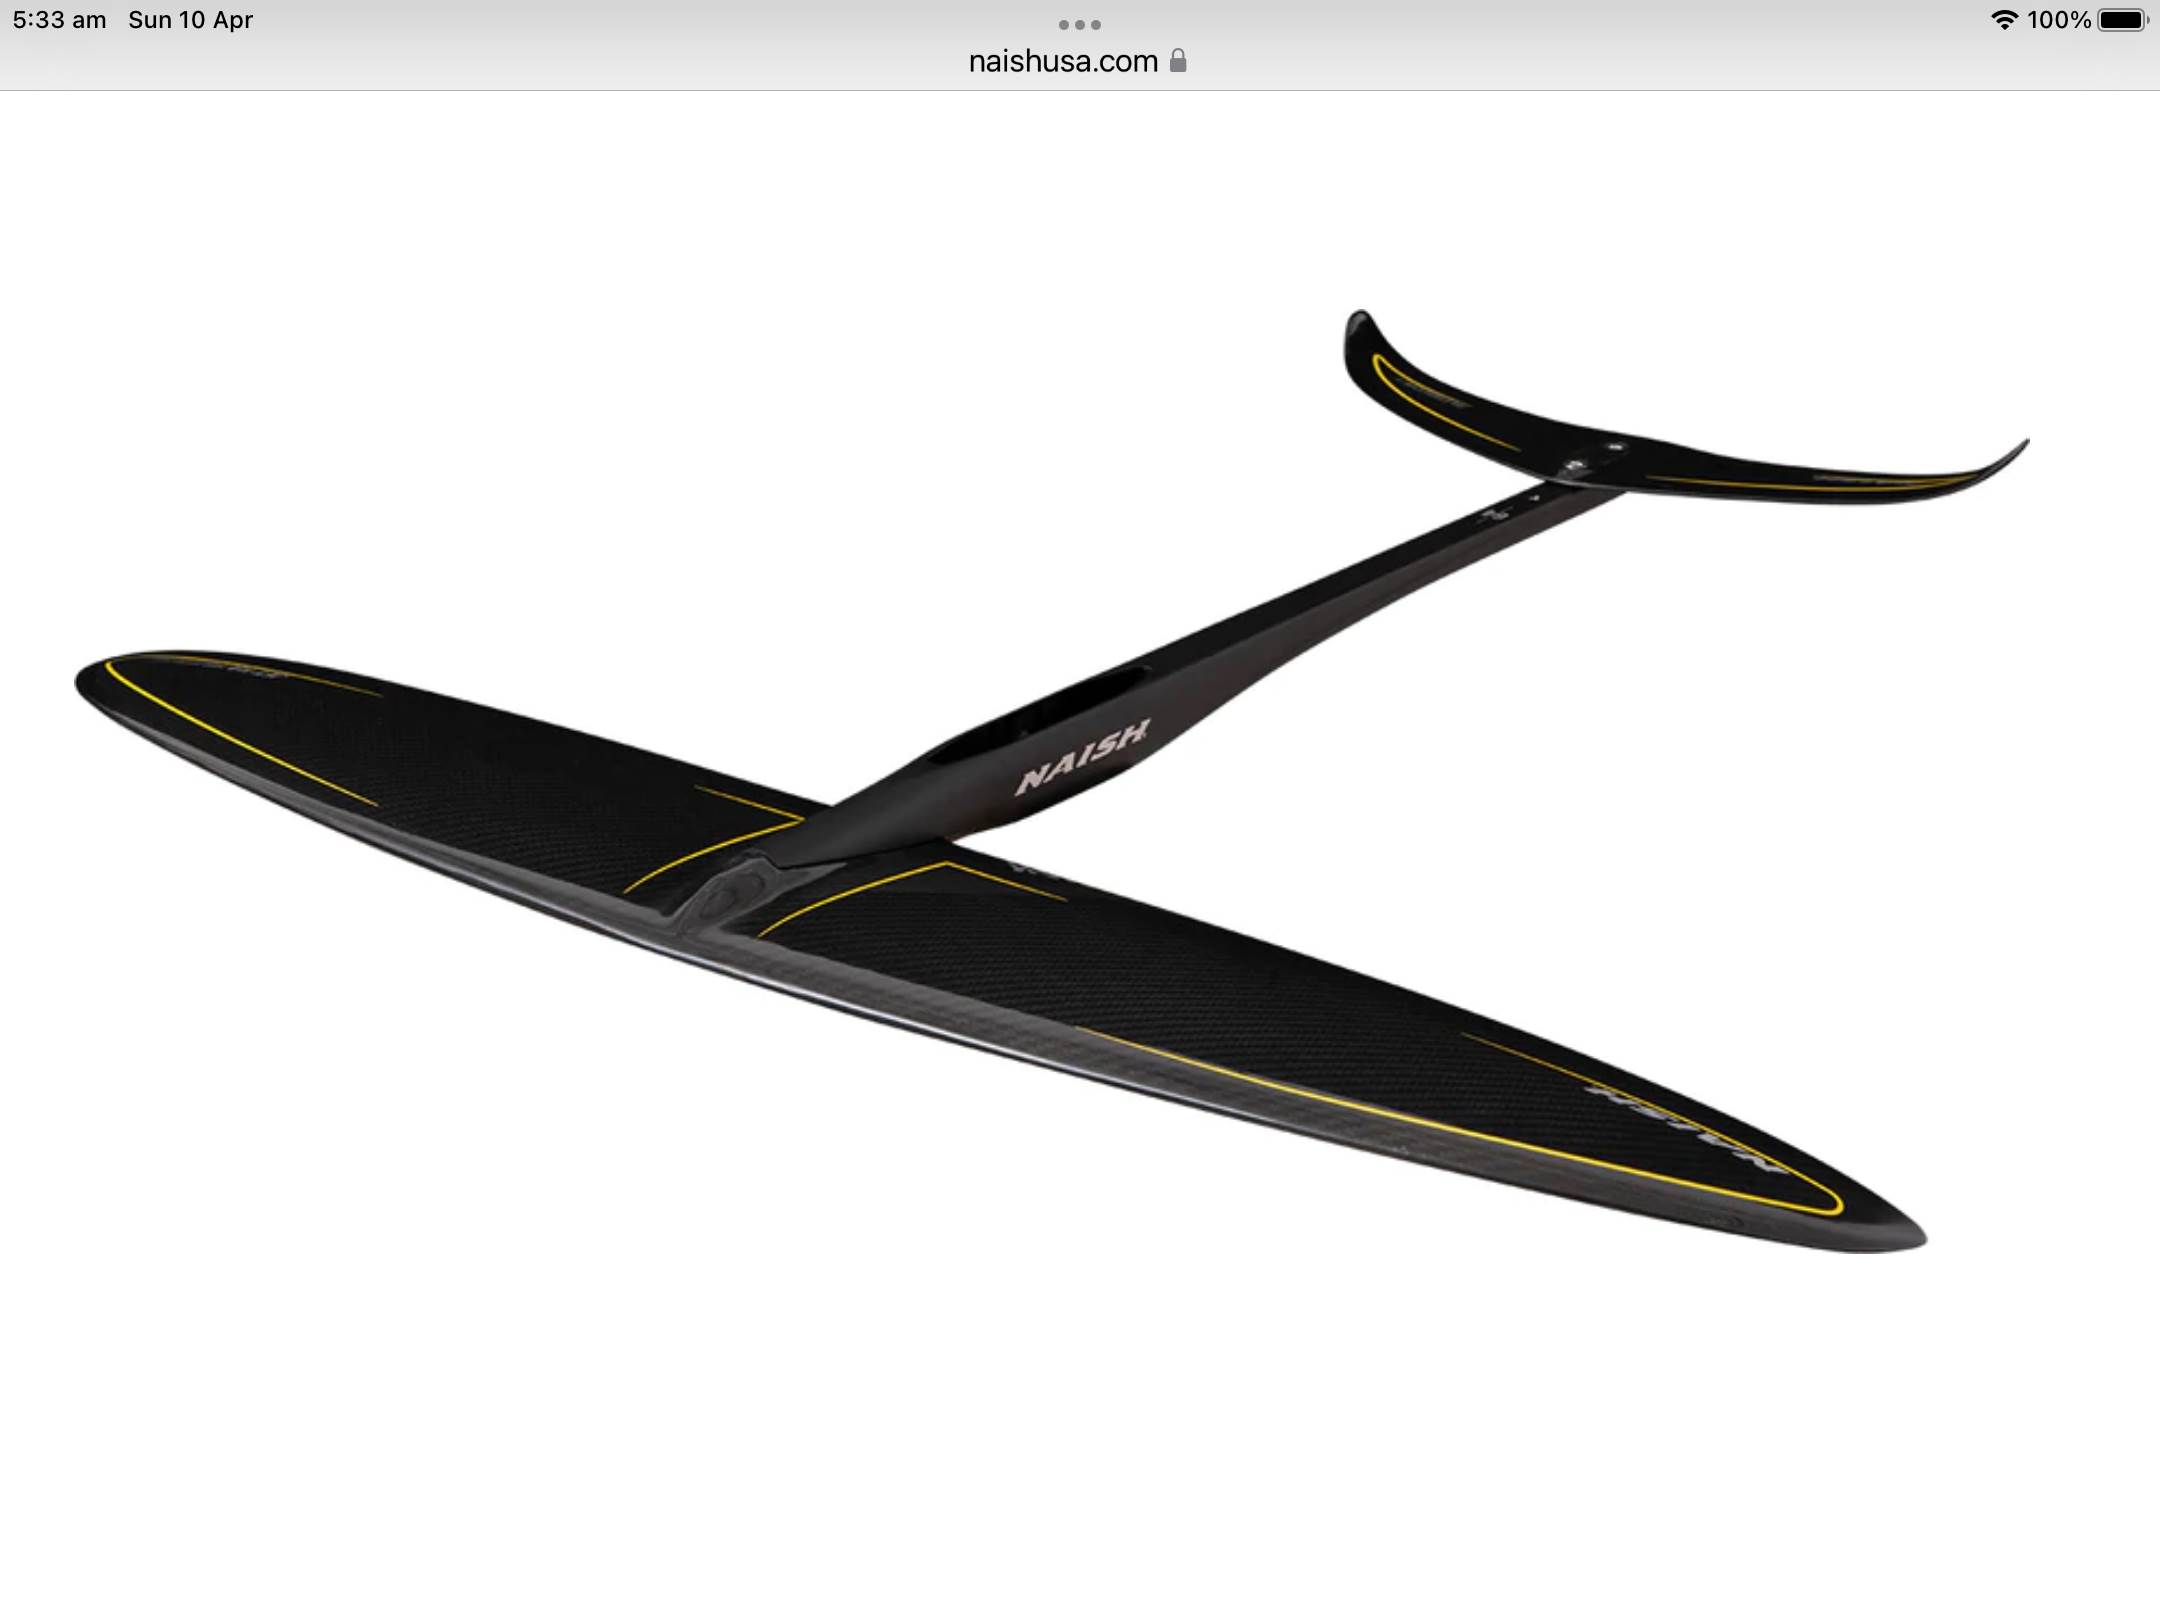 S27 Naish foils | Wing Foiling Forums, page 1 - Seabreeze